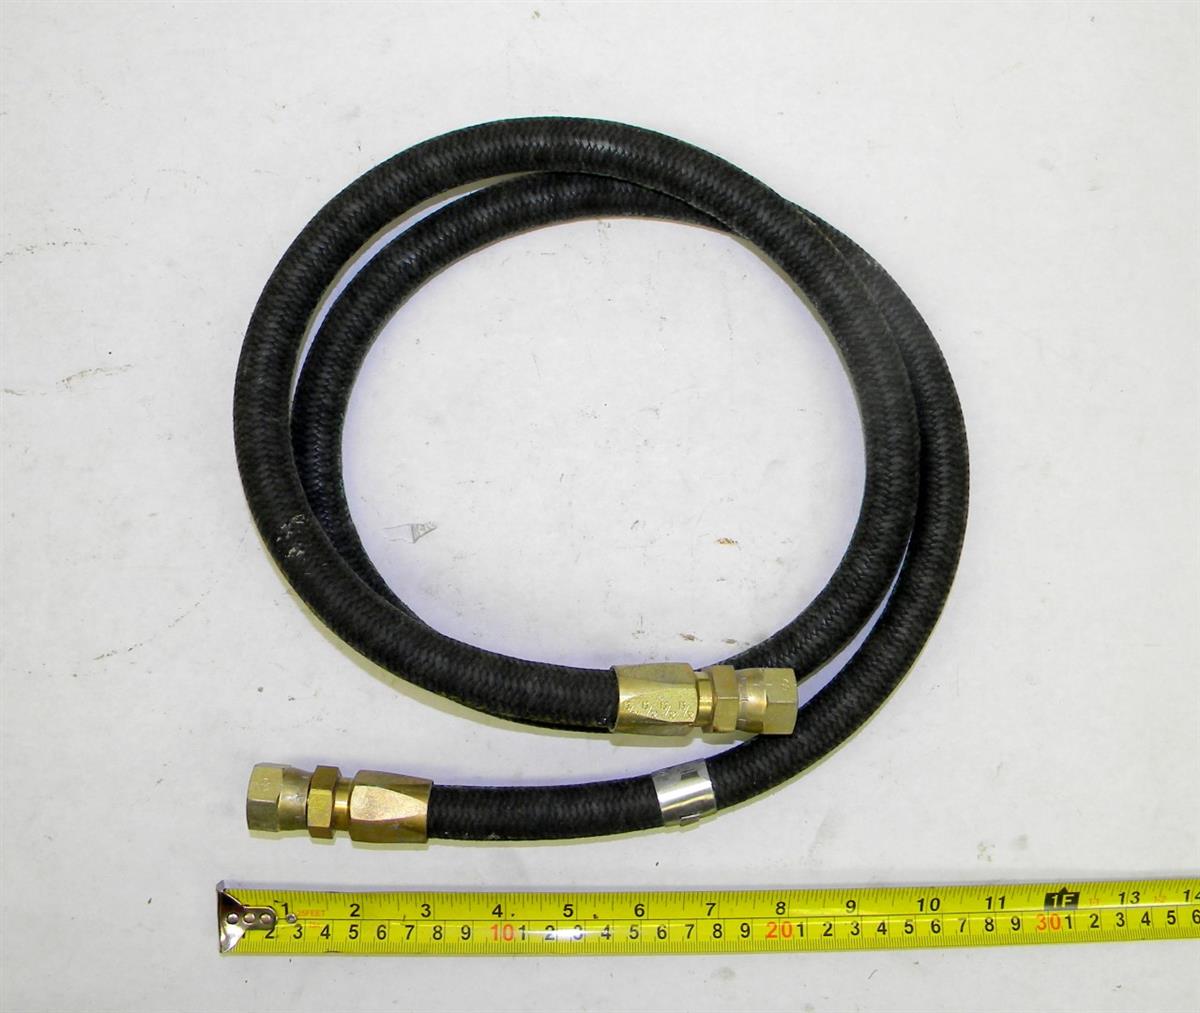 SP-1451 | 4720-01-191-6449 Air Brake Hose 60 Inch for M548 and M1015A1 Cargo Carrier. NOS.  (2).JPG